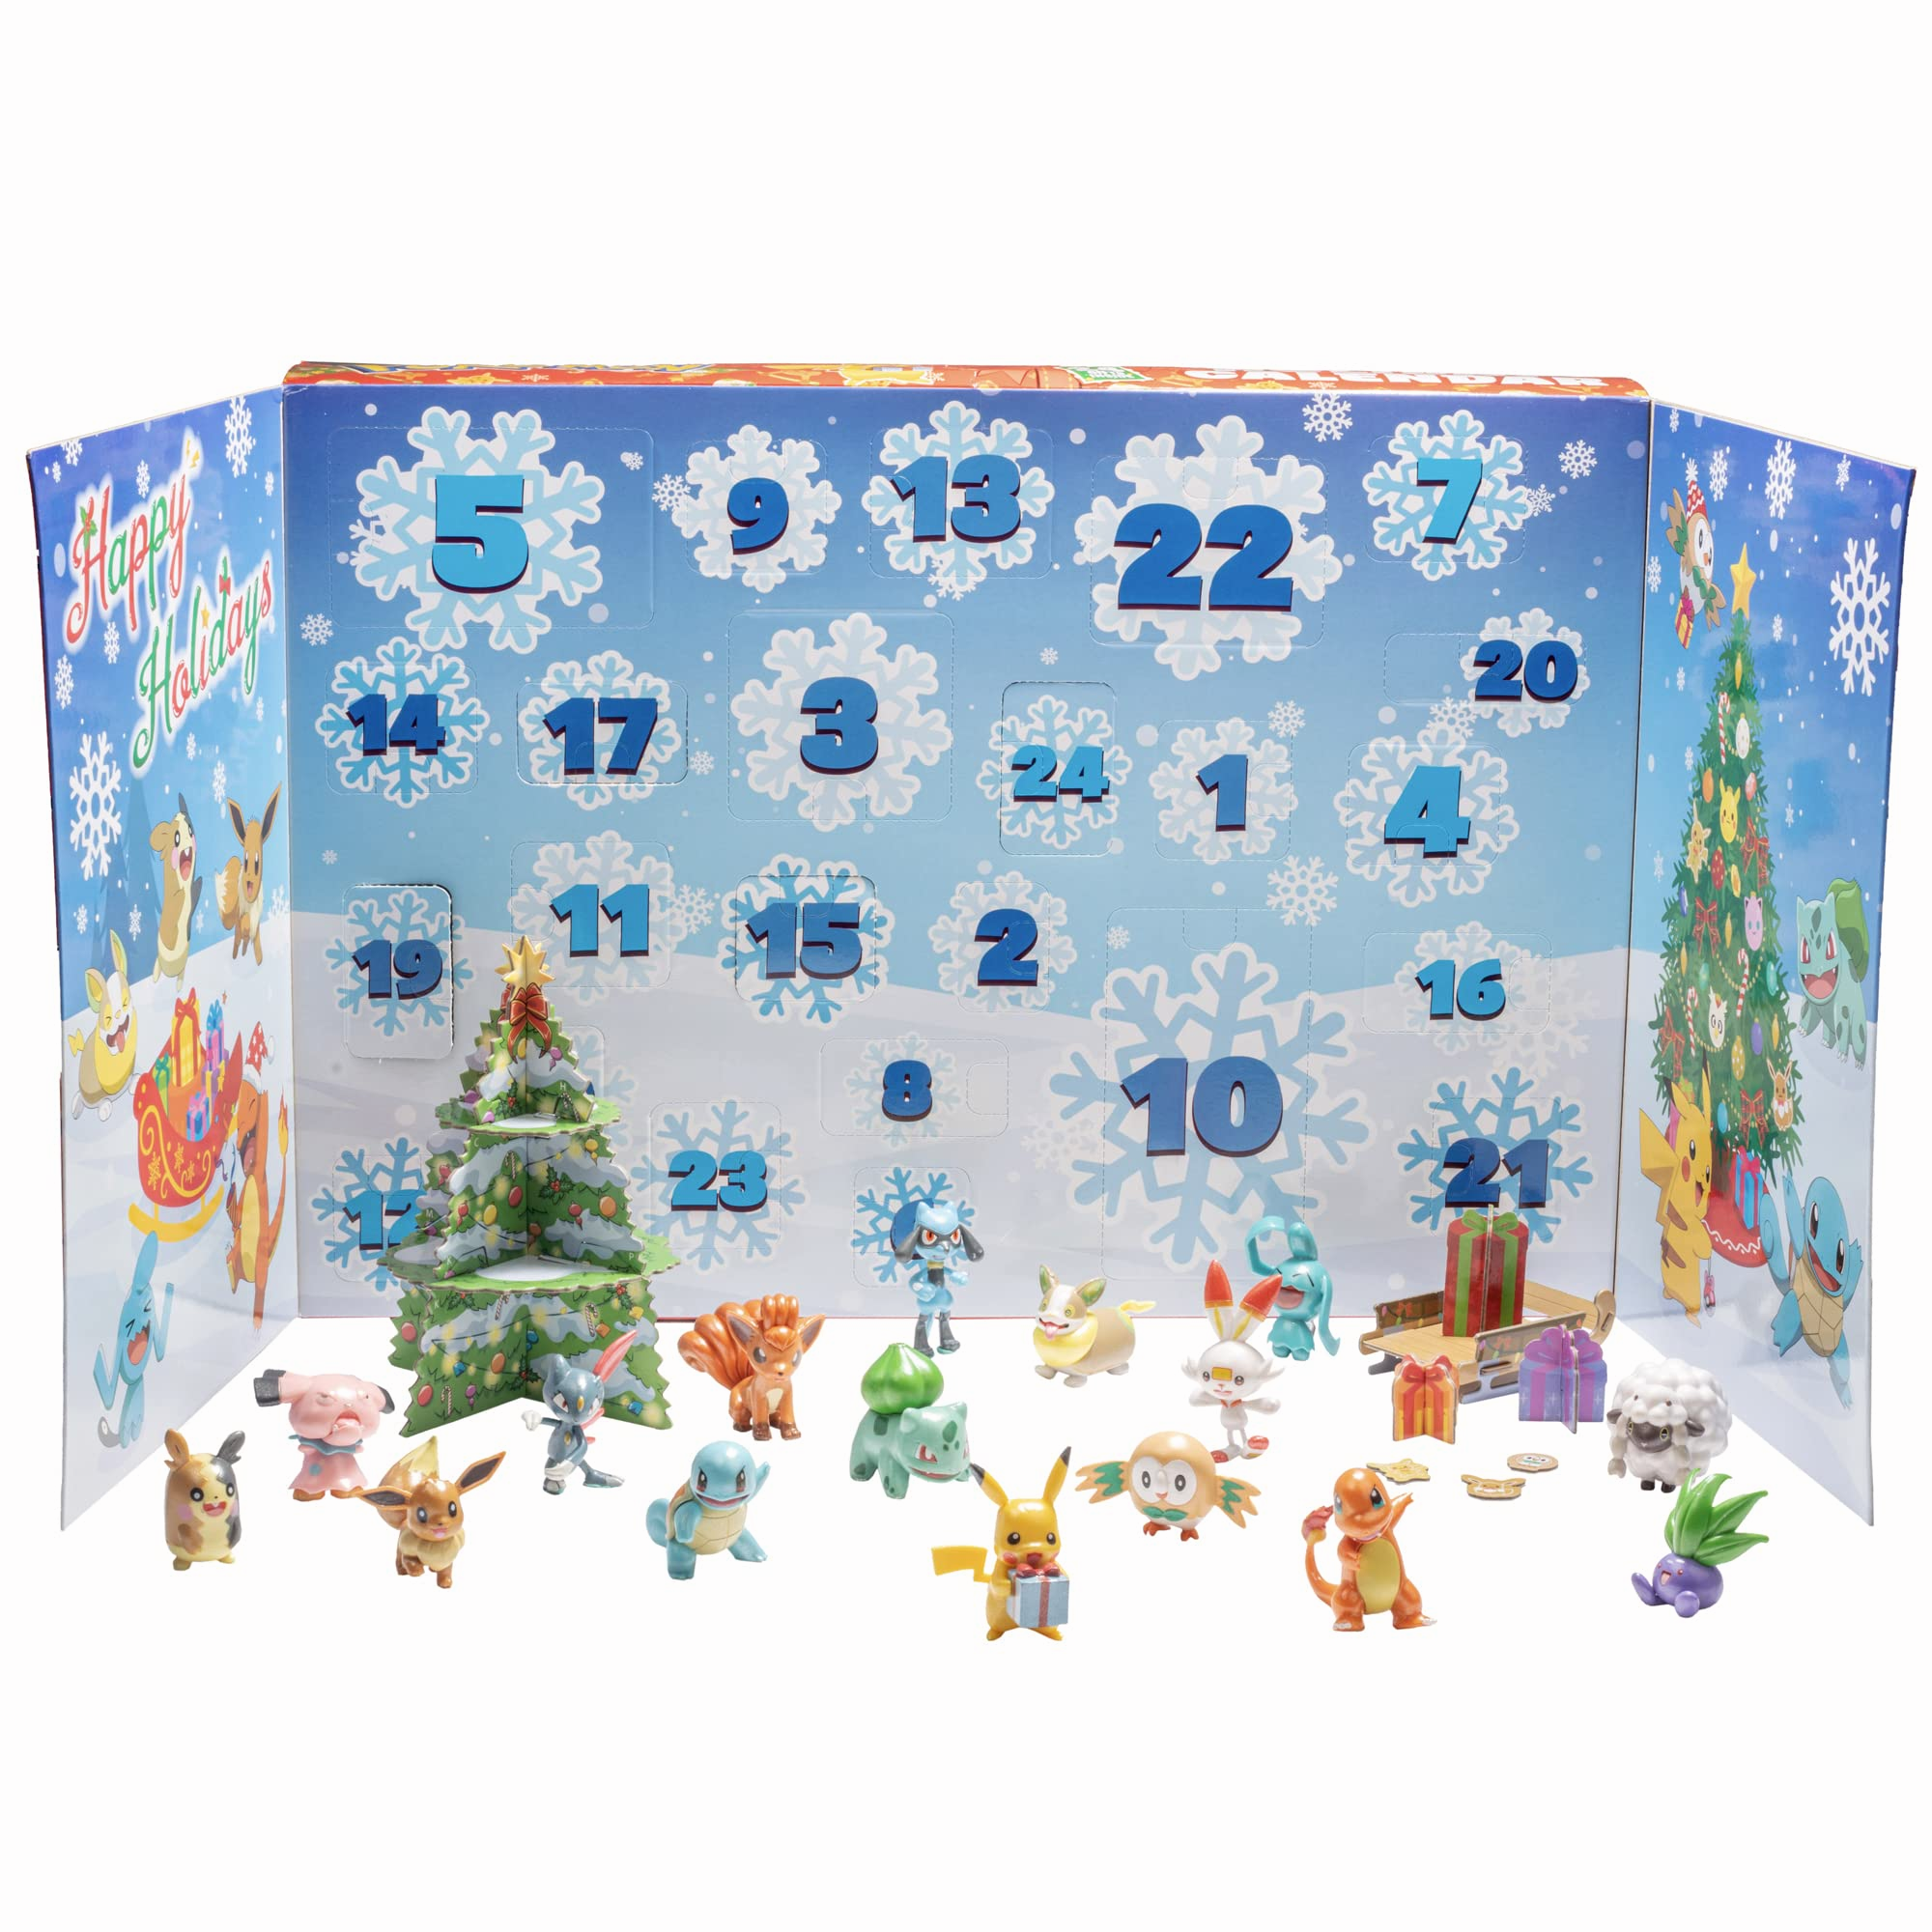  Pokémon Countdown Advent Calendar for Kids, 16 Piece Gift  Playset - Set Includes Special Finish Pikachu, Bulbasaur, Gengar and More -  11 Toy Character Figures & 5 Accessories - 4+ : Jazwares: Home & Kitchen